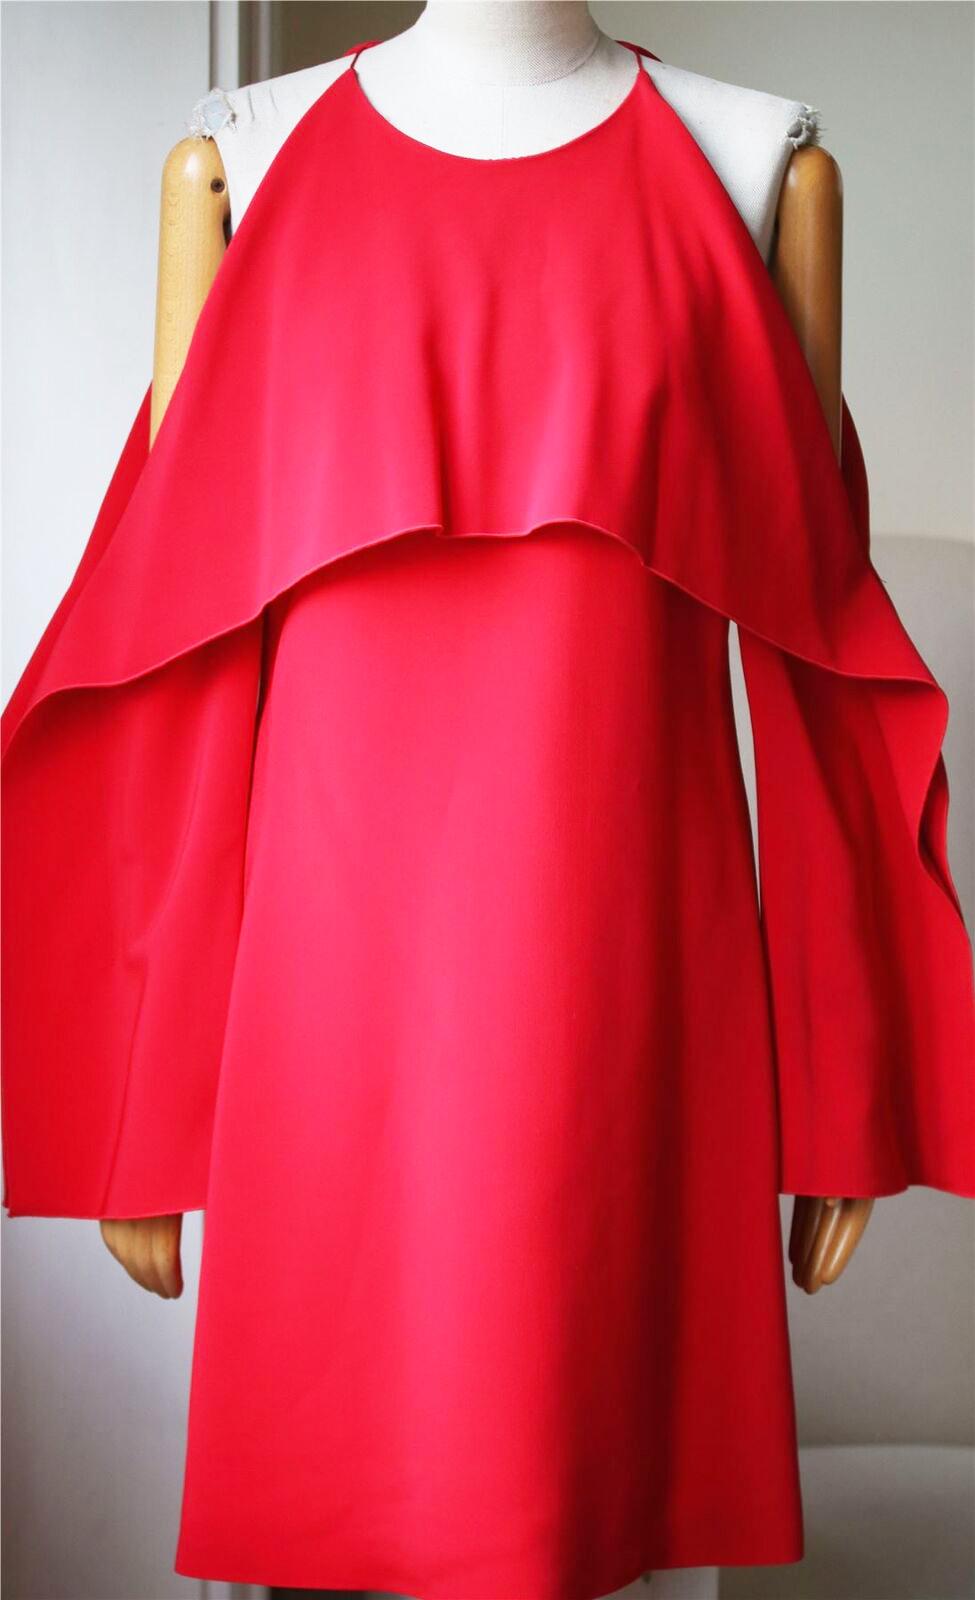 Made from stretch-cady, this dress has a draped overlay that folds over the bodice, cutout shoulders and wide, geometric sleeves. Red stretch-cady. Concealed zip fastening along back. 96% viscose, 4% elastane; lining: 93% silk, 7% spandex. Designer